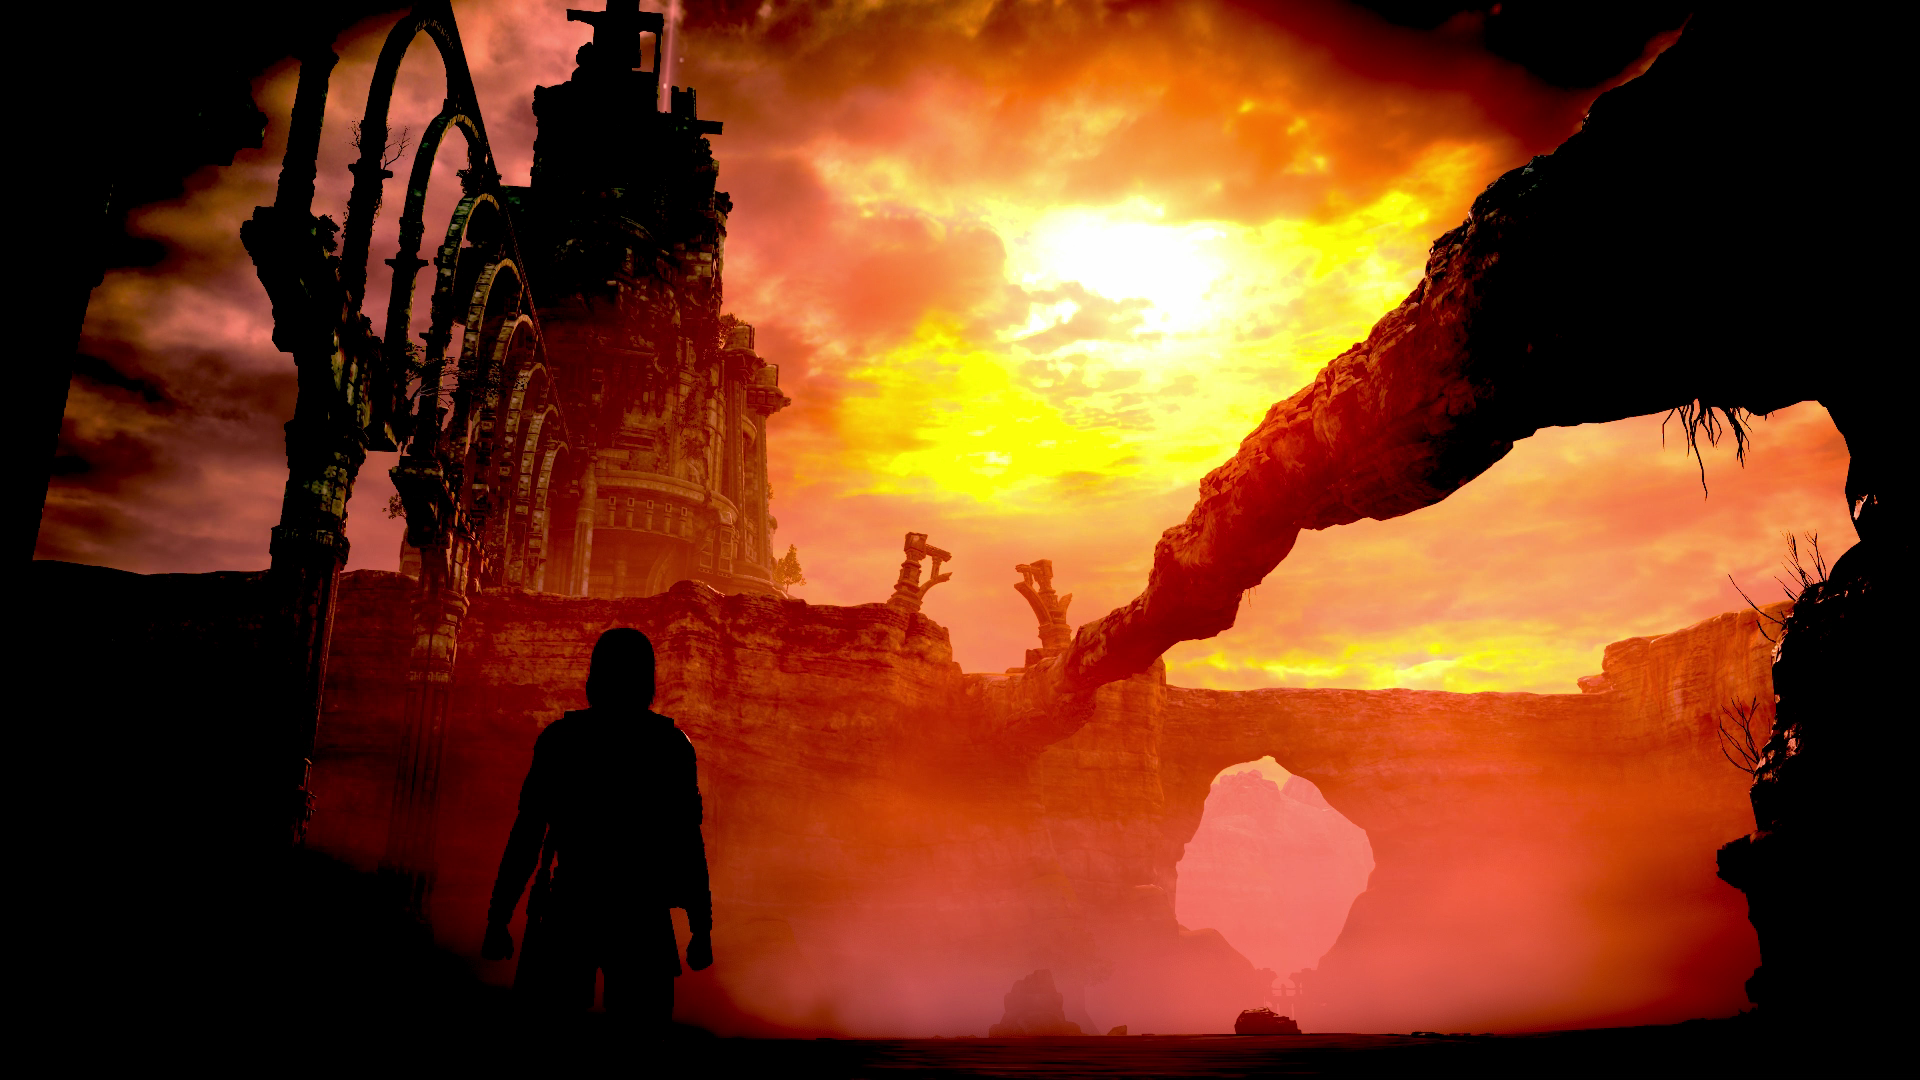 shadow-of-the-colossus-photo-mode_39657136961_o